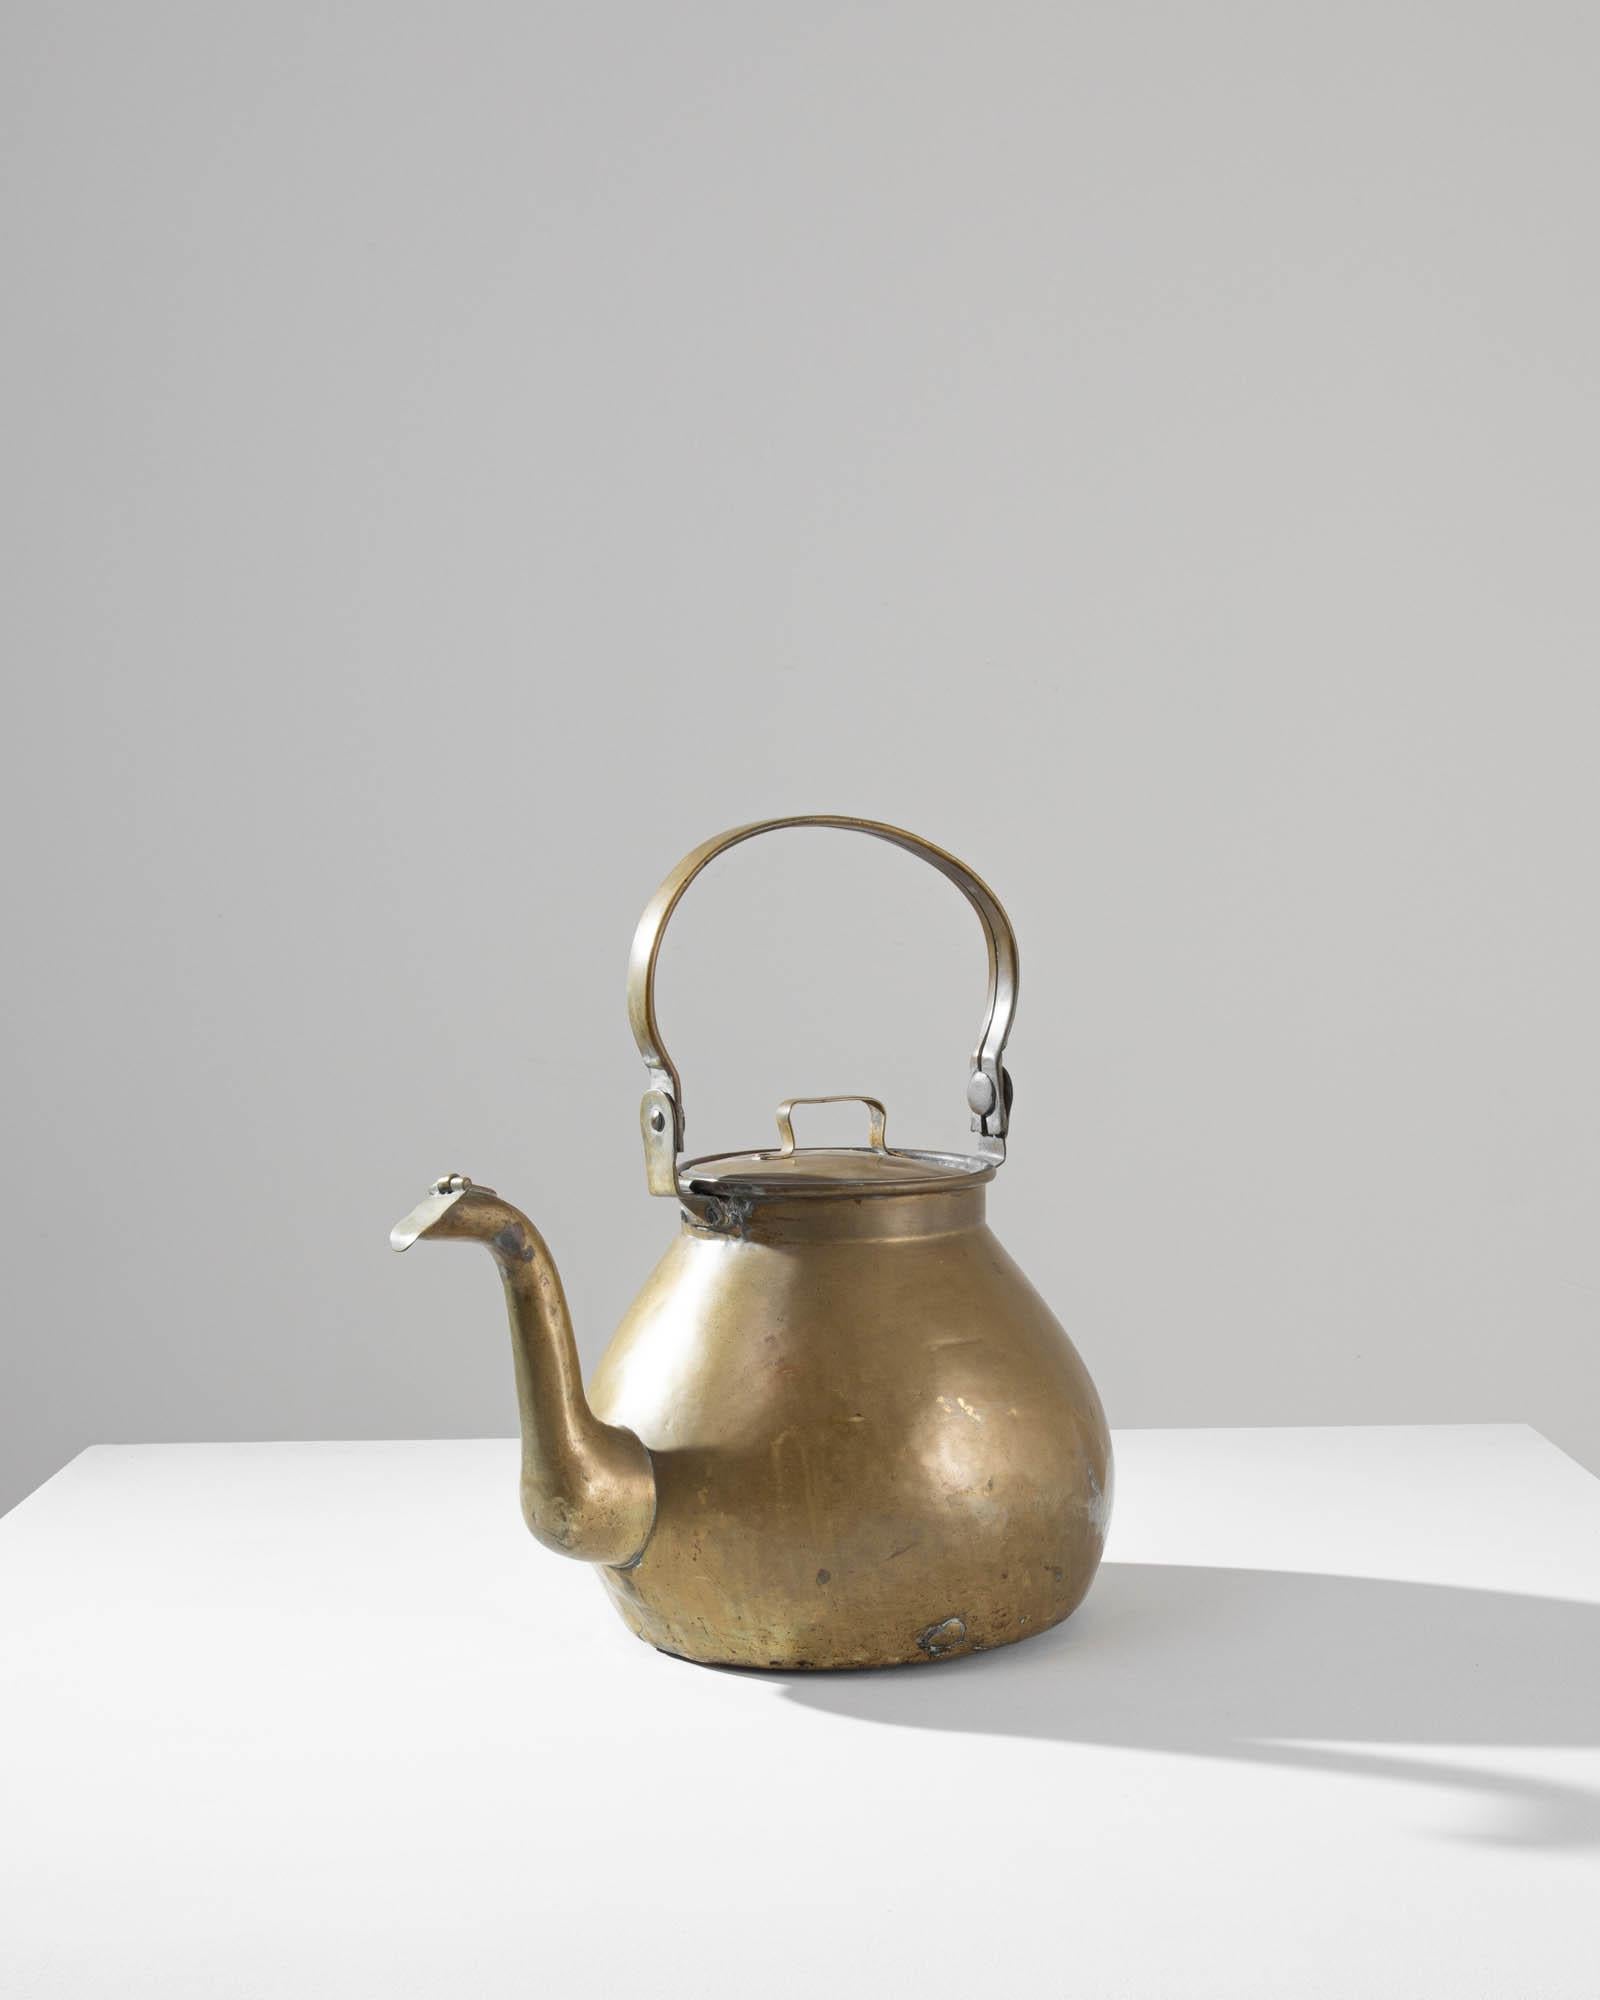 This elegant antique kettle makes a delightful addition to a kitchen. Made in France in the 1800s, the tall handle may once have been used to hang over an open fire. The graceful curvature of the spout – clapped shut with a small metal plate – lends